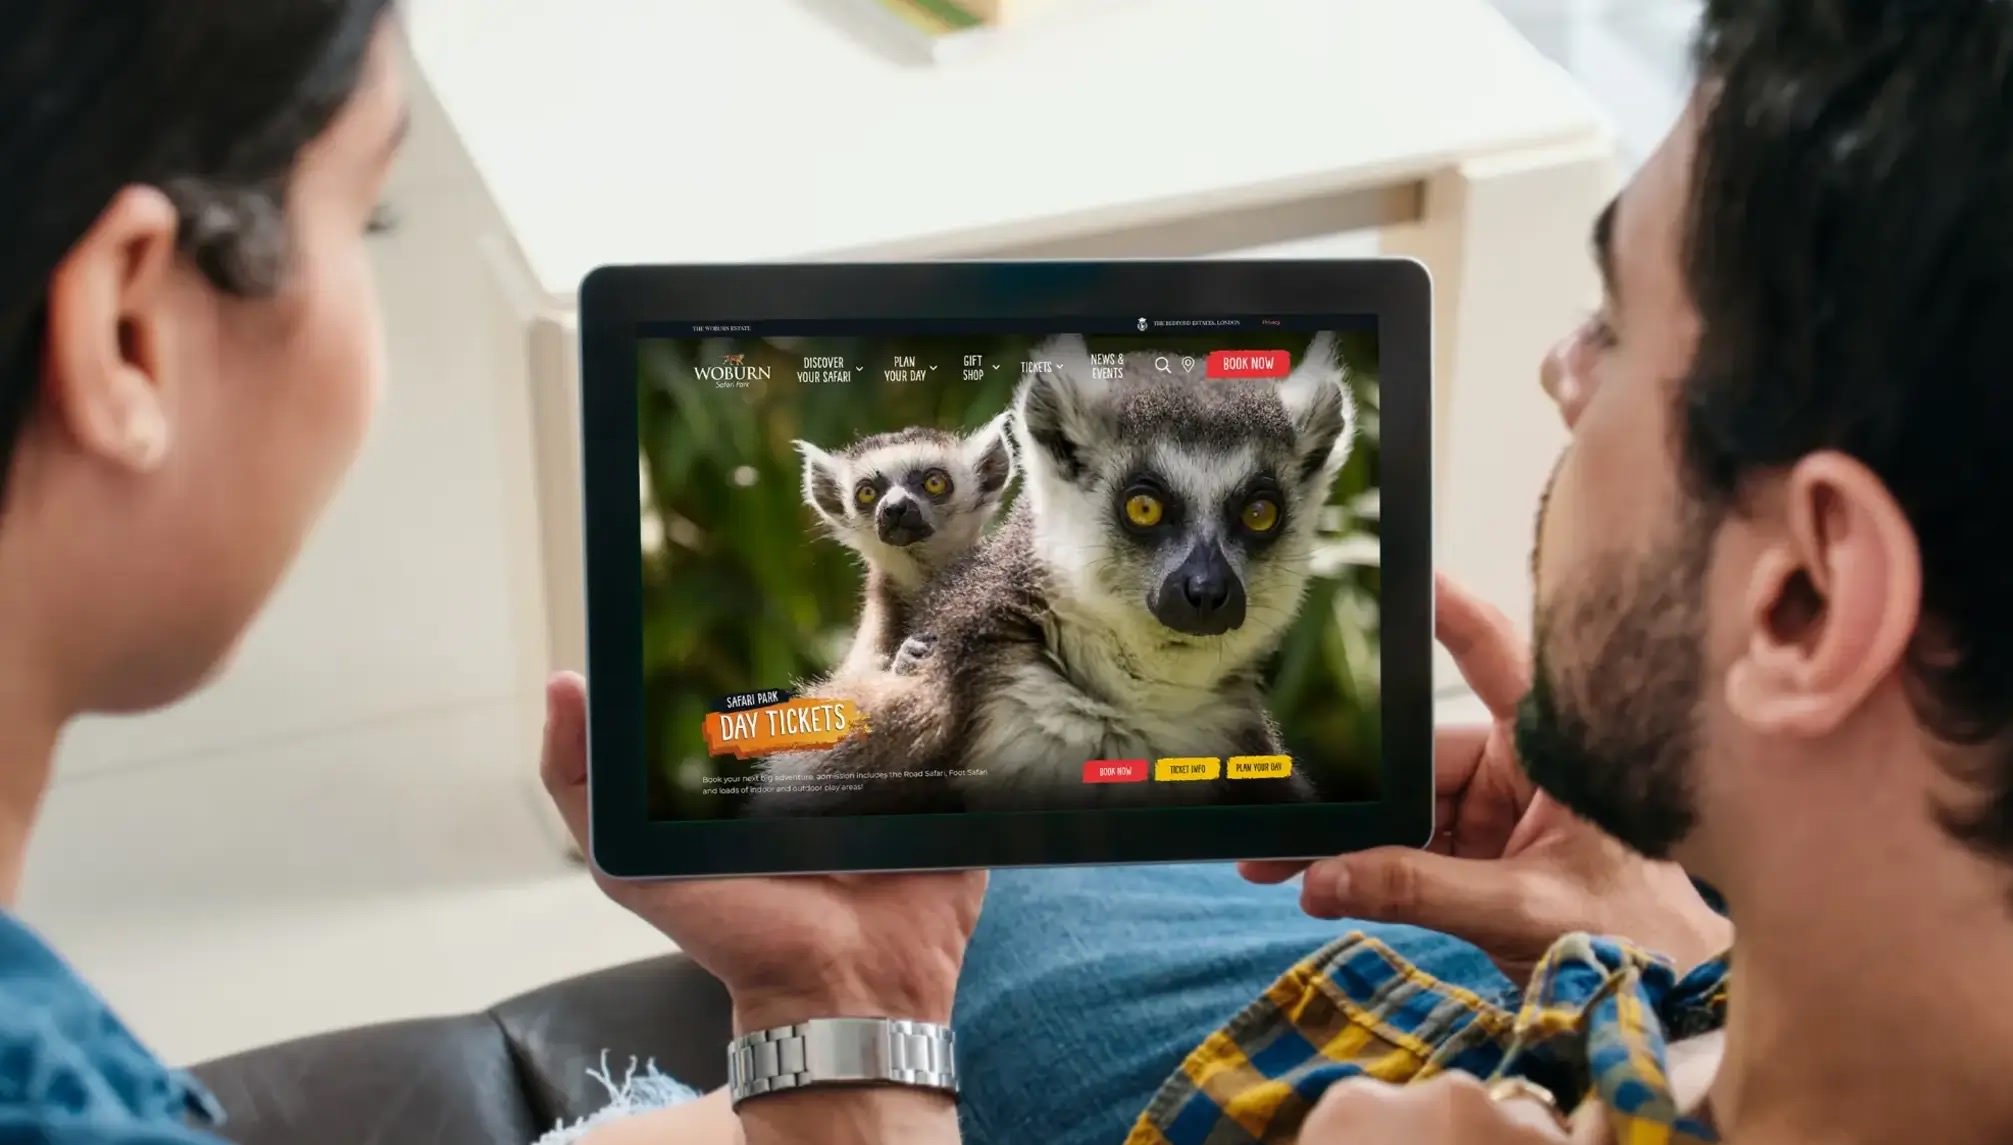 A couple holding an iPad showing the new Woburn Safari website